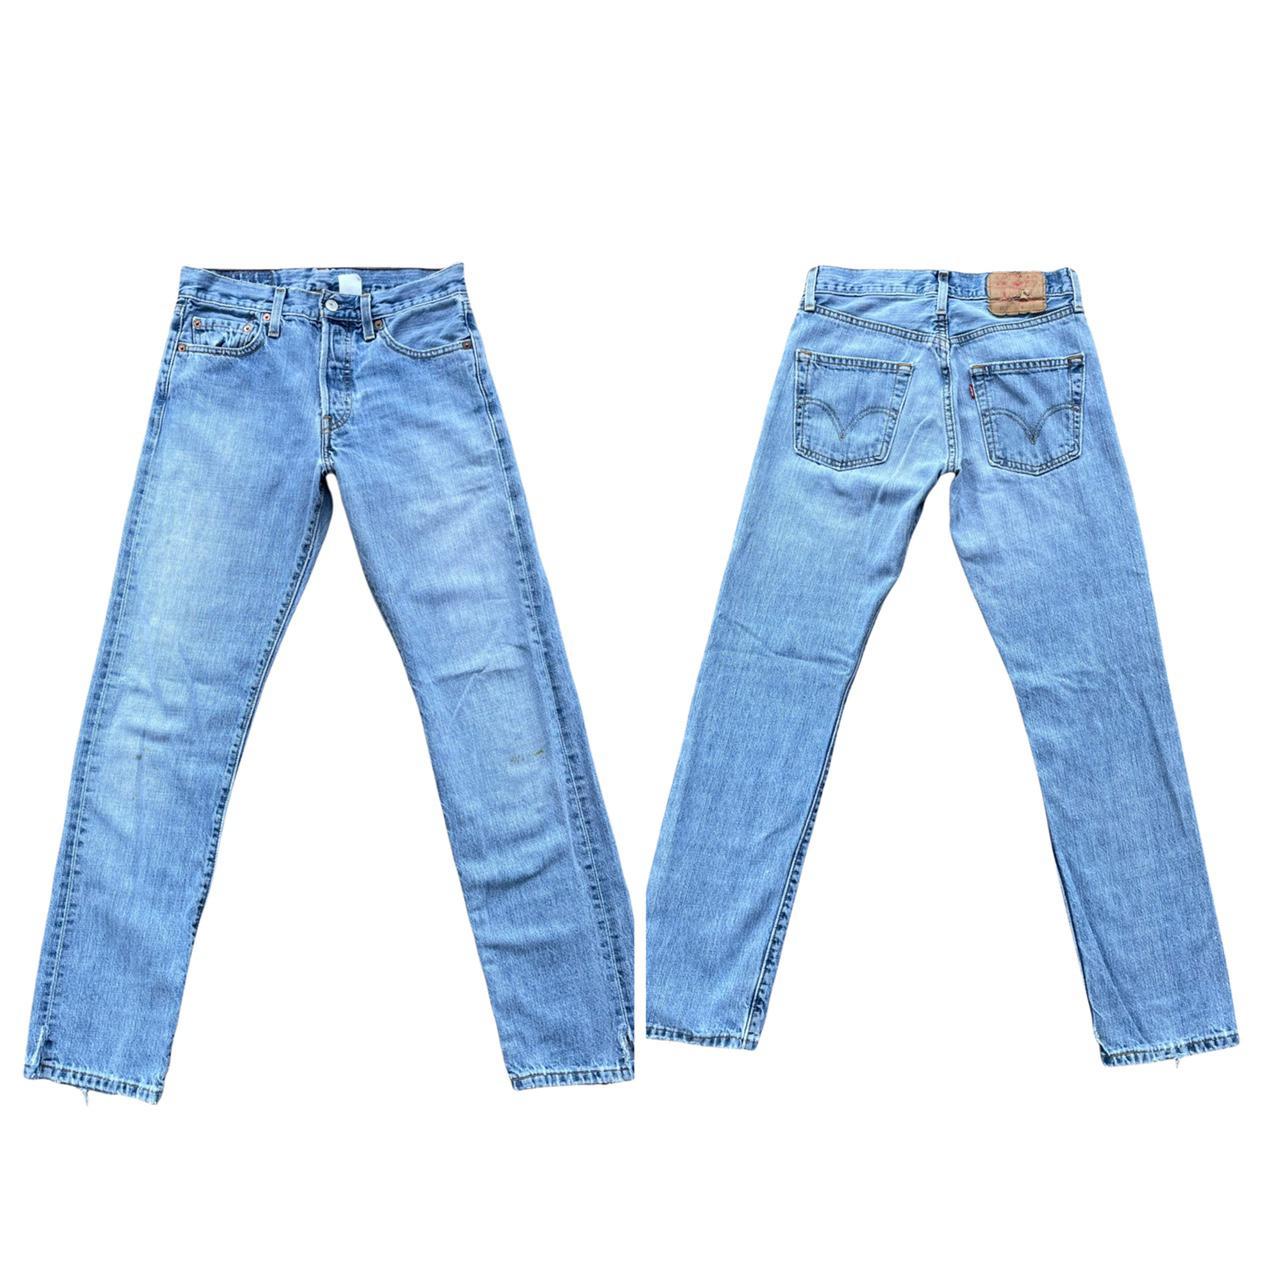 Product Image 3 - Y2K Grunge Levi’s 501 Jeans

Perfectly